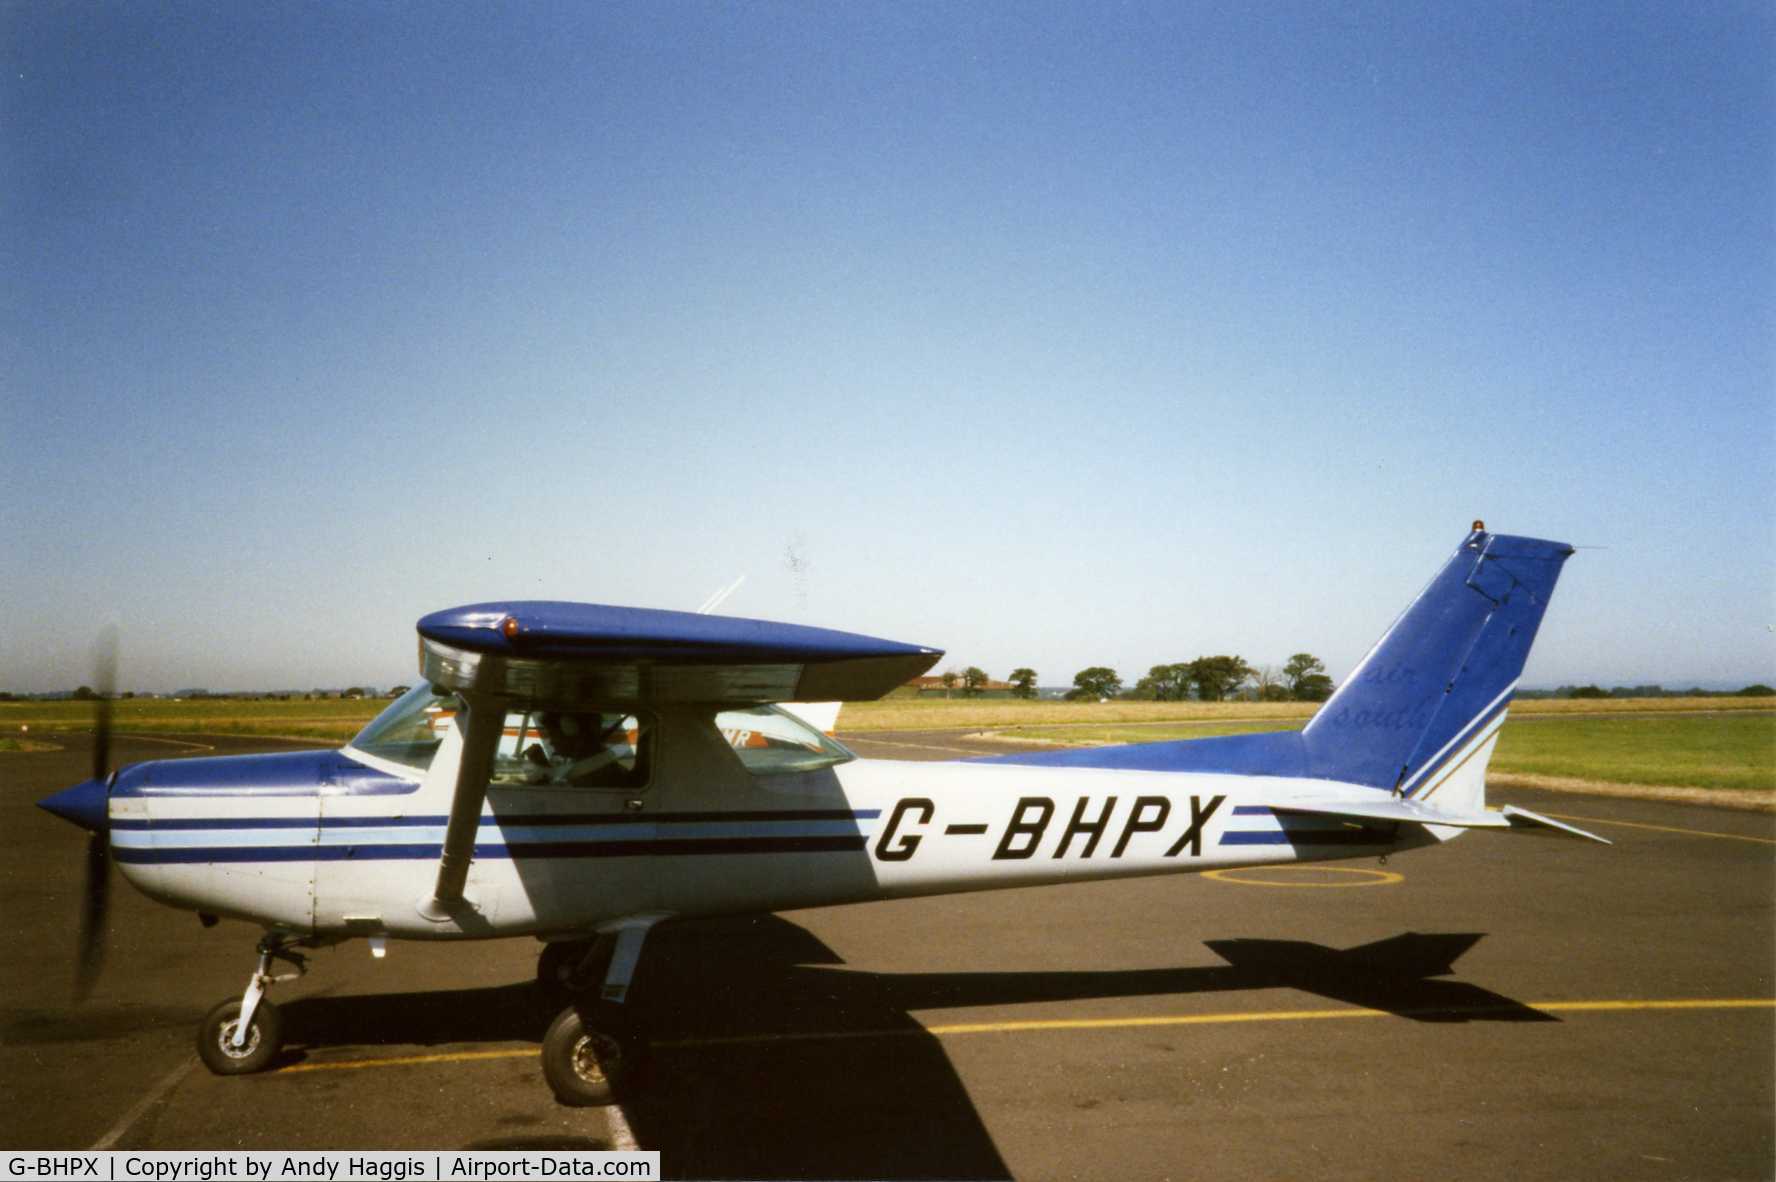 G-BHPX, 1978 Cessna 152 C/N 152-82994, Taken at Carlisle Airport, being used by Cumbria Aero Club, 1997